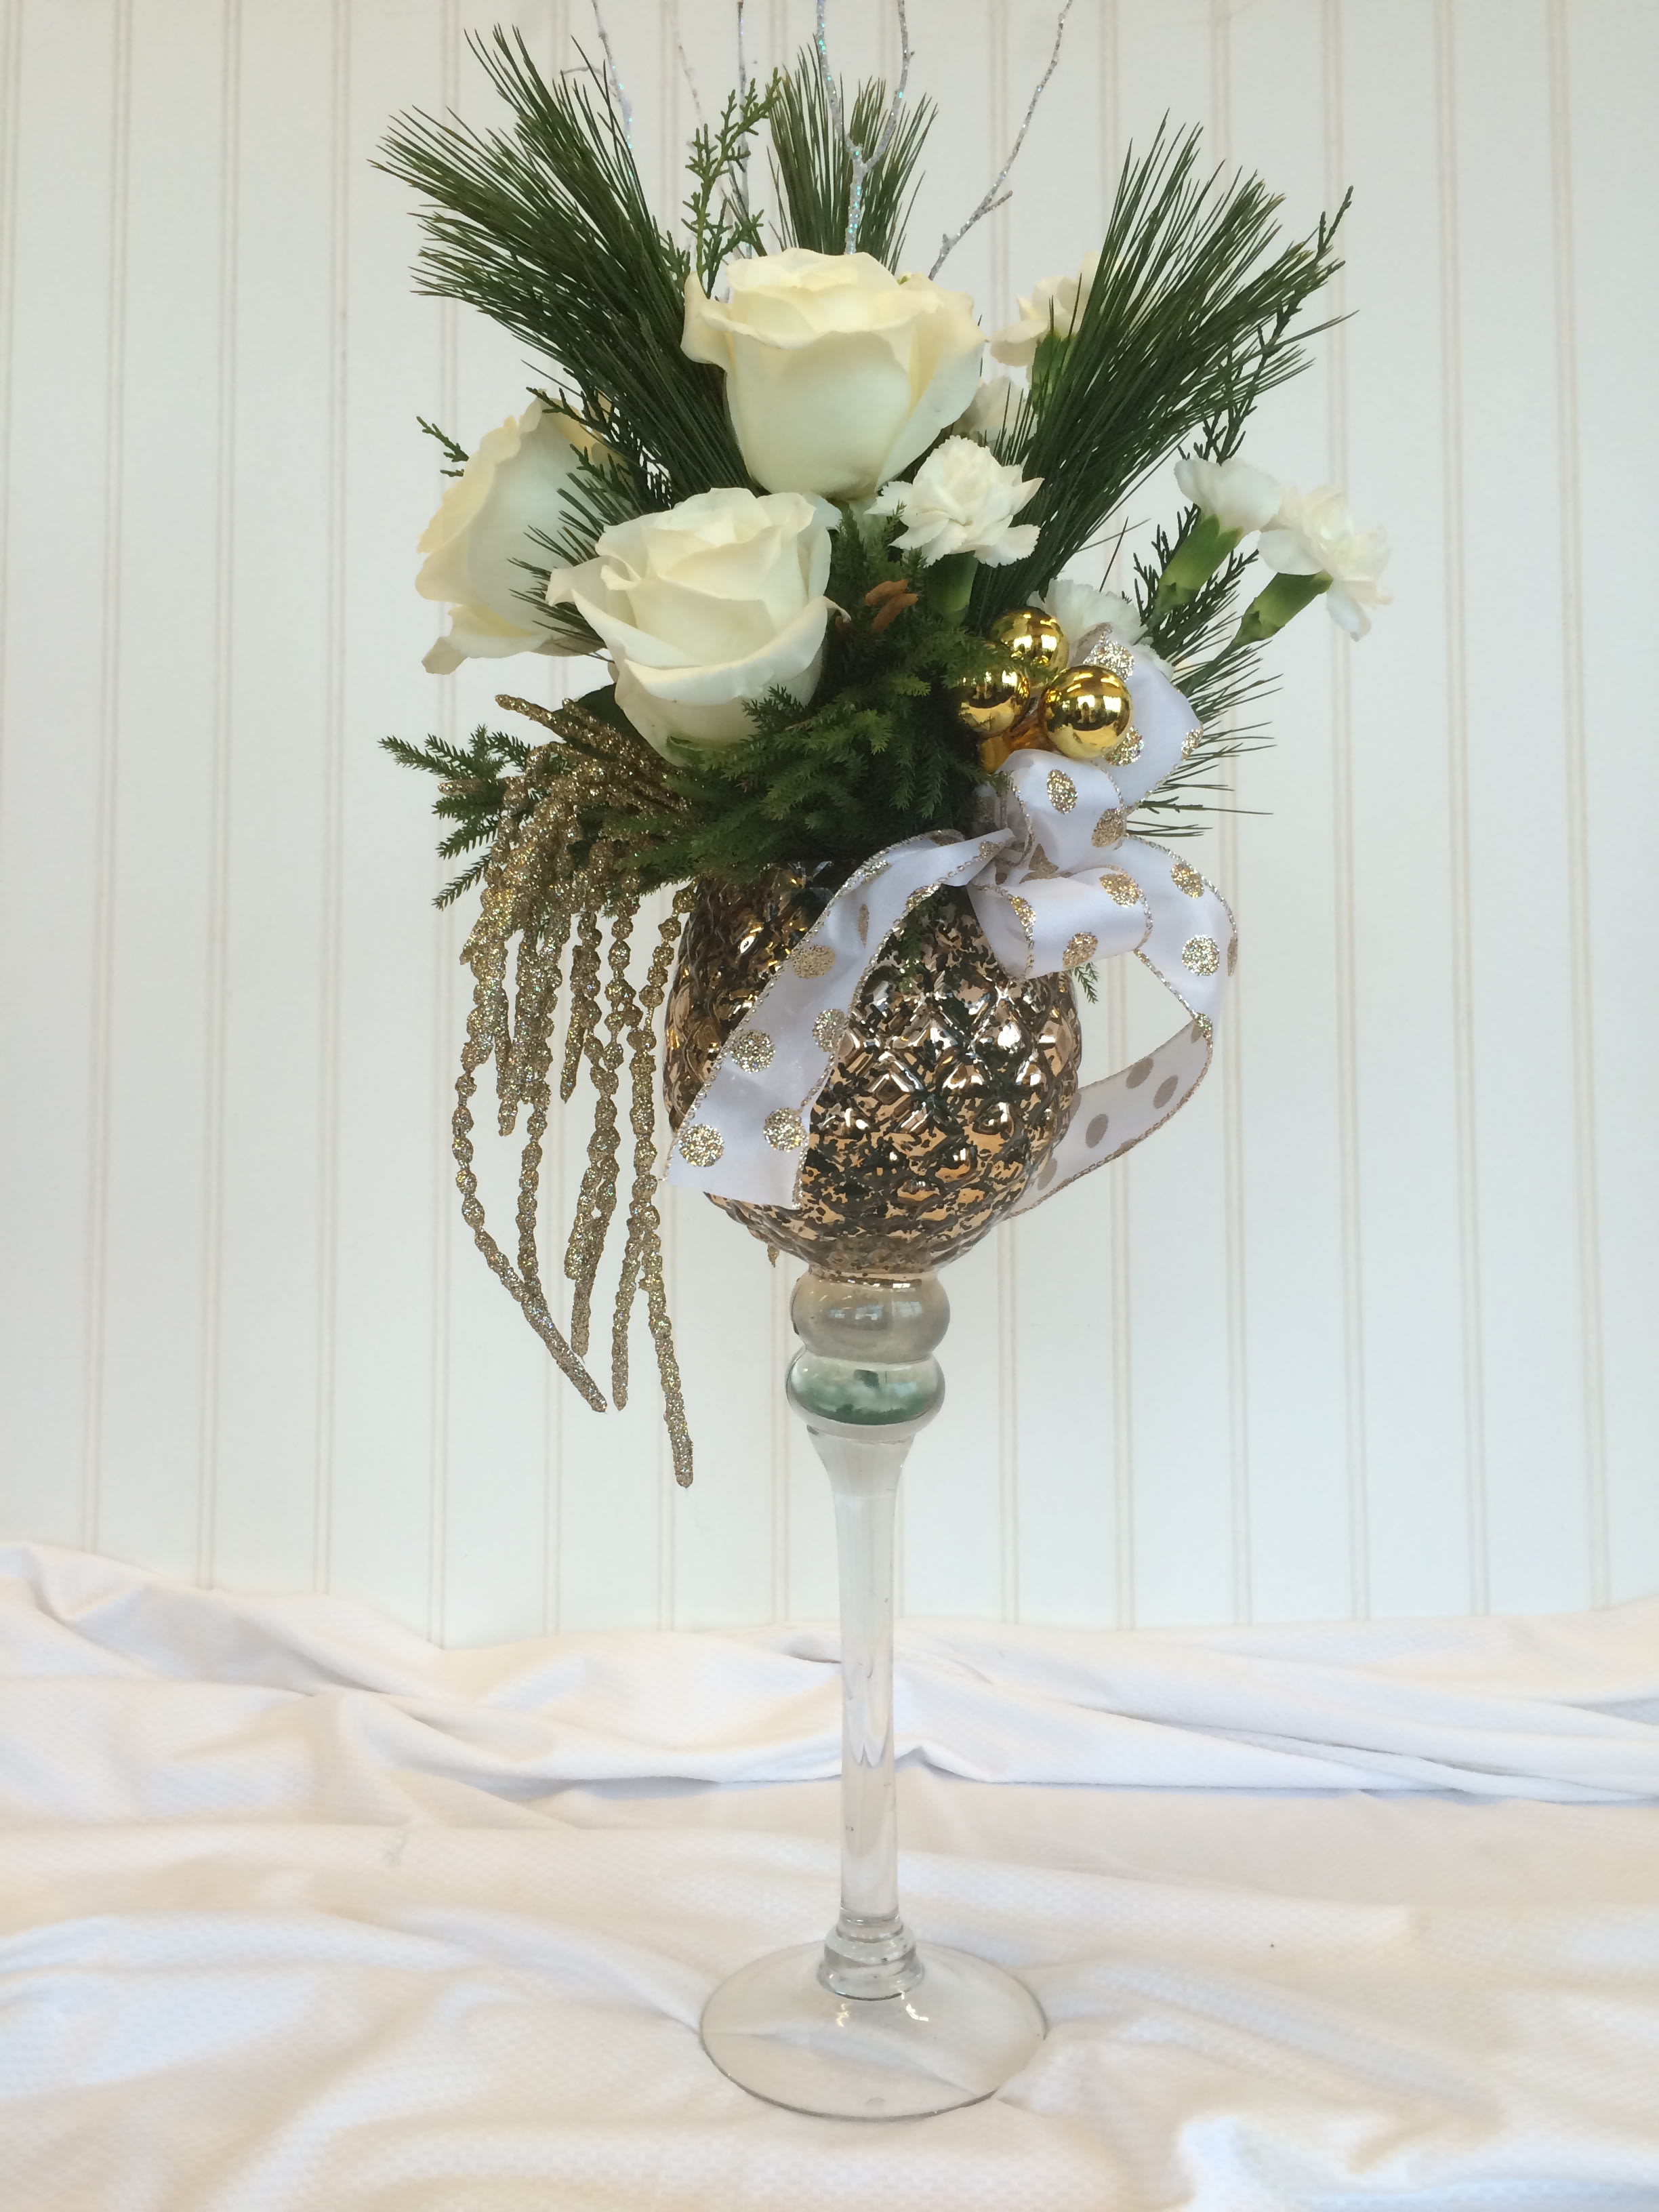 Golden Glory - A classy golden goblet designed with all white flowers &amp; evergreens. Trimmings of gold bling &amp; ribbon to grace your table!